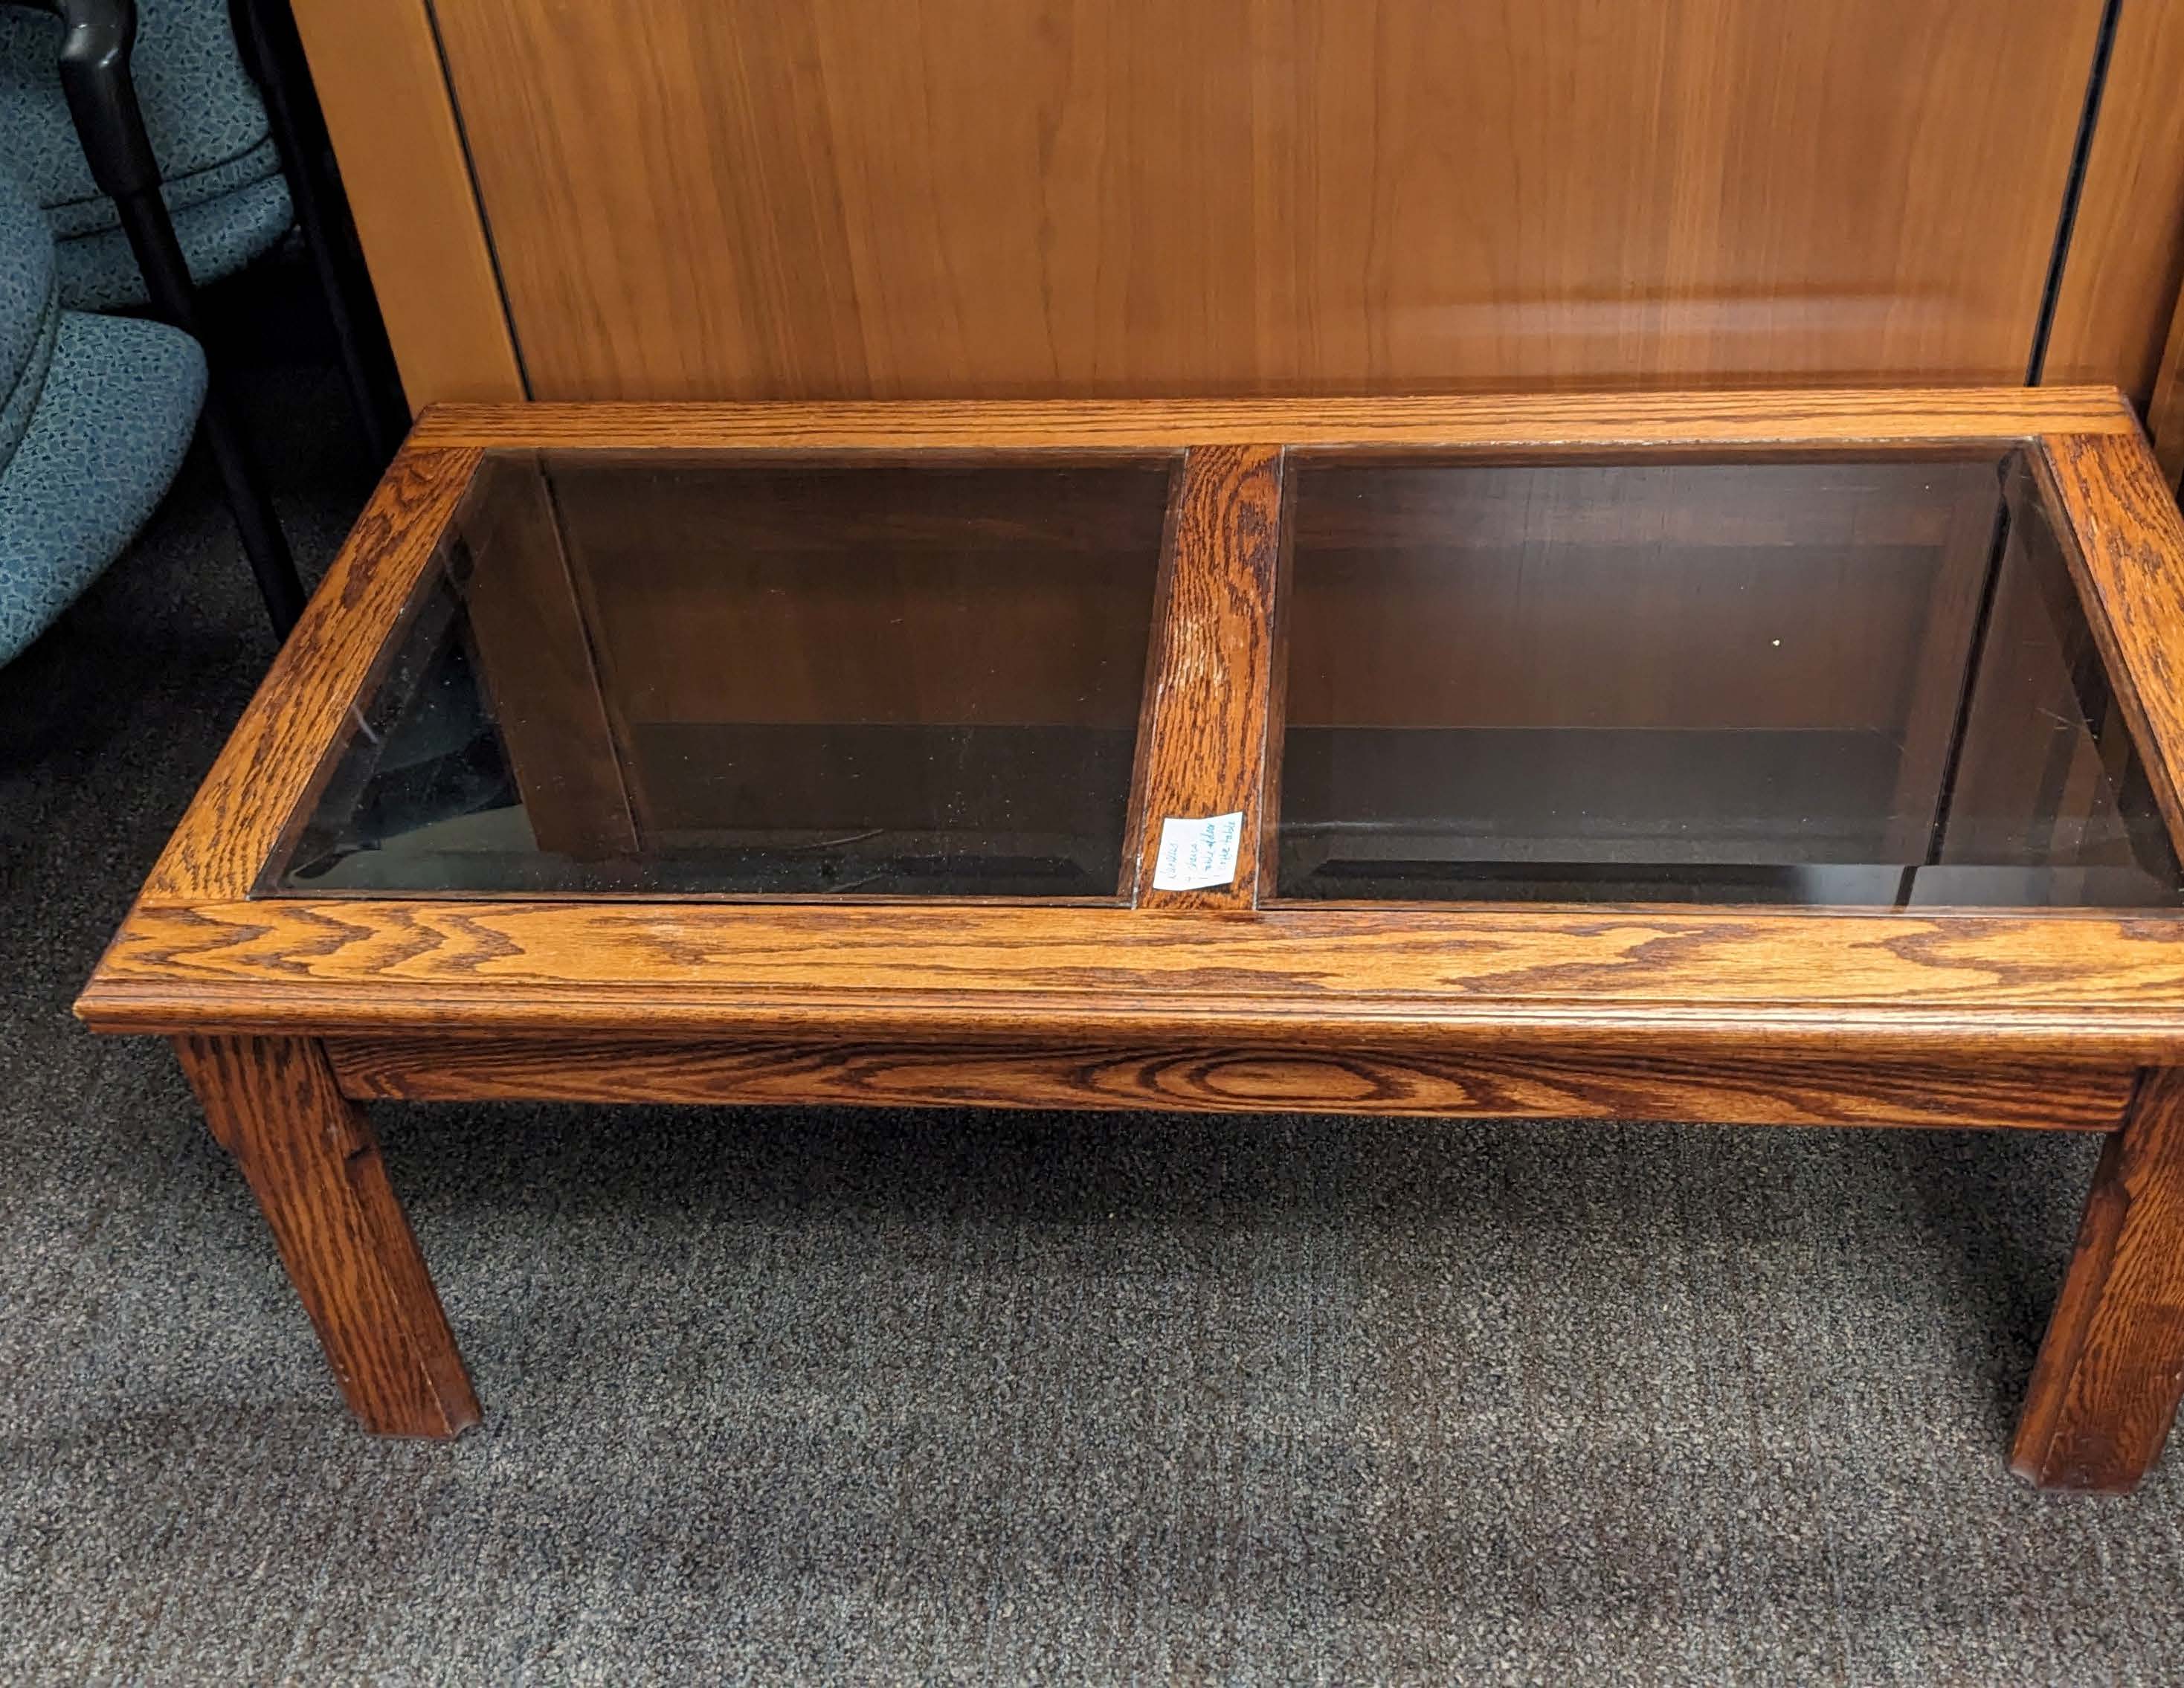 Wooden coffee table with glass top inlay